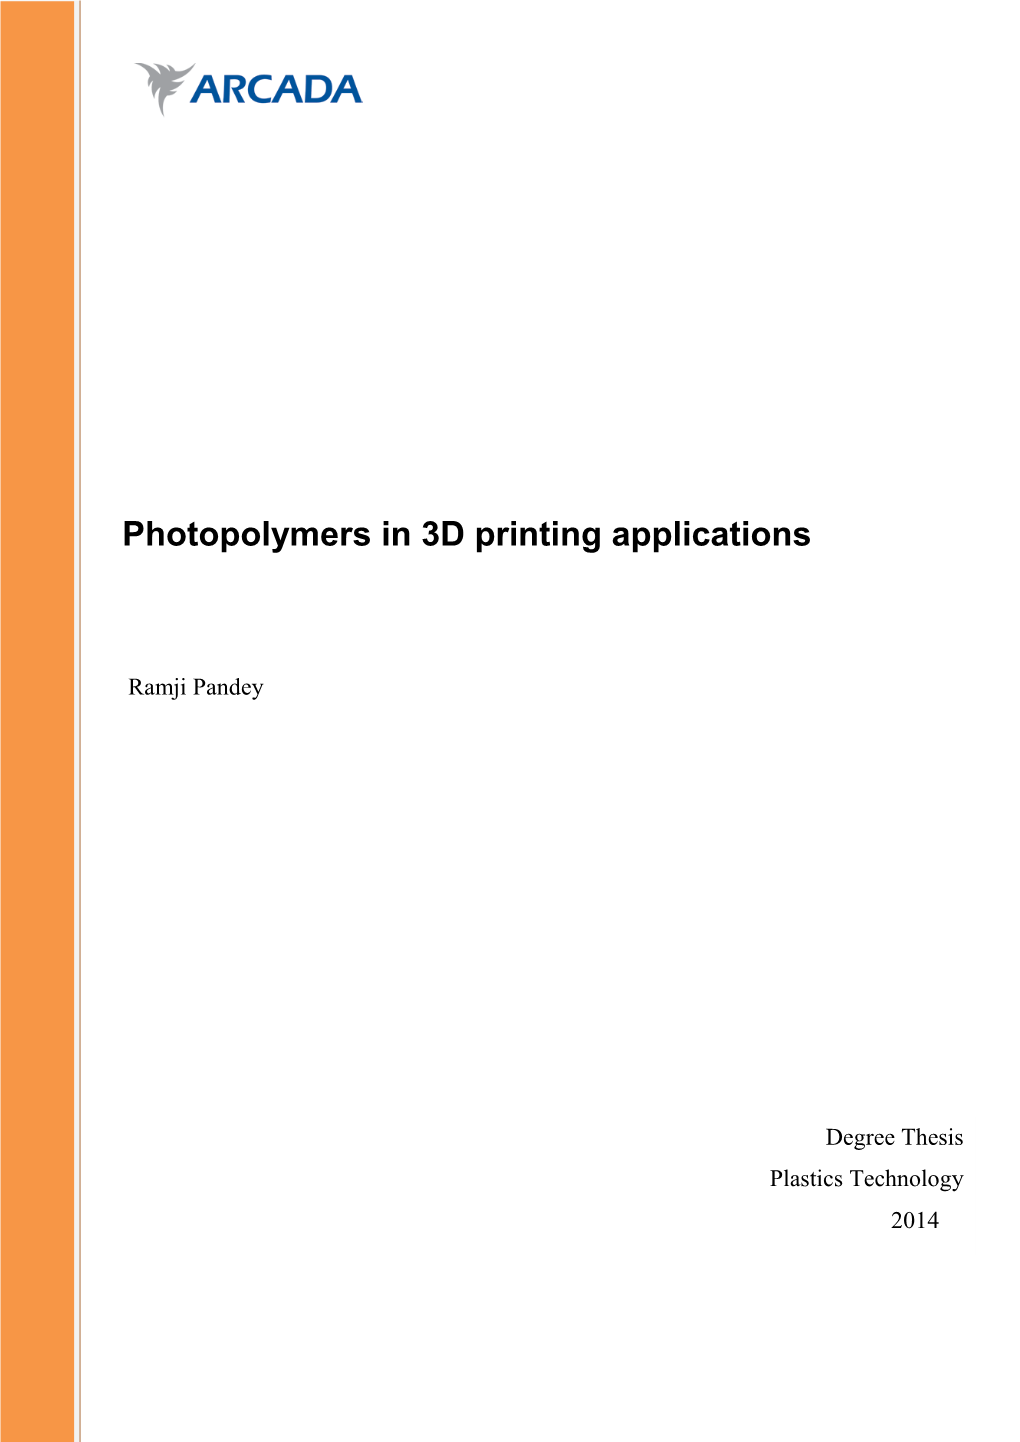 Photopolymers in 3D Printing Applications